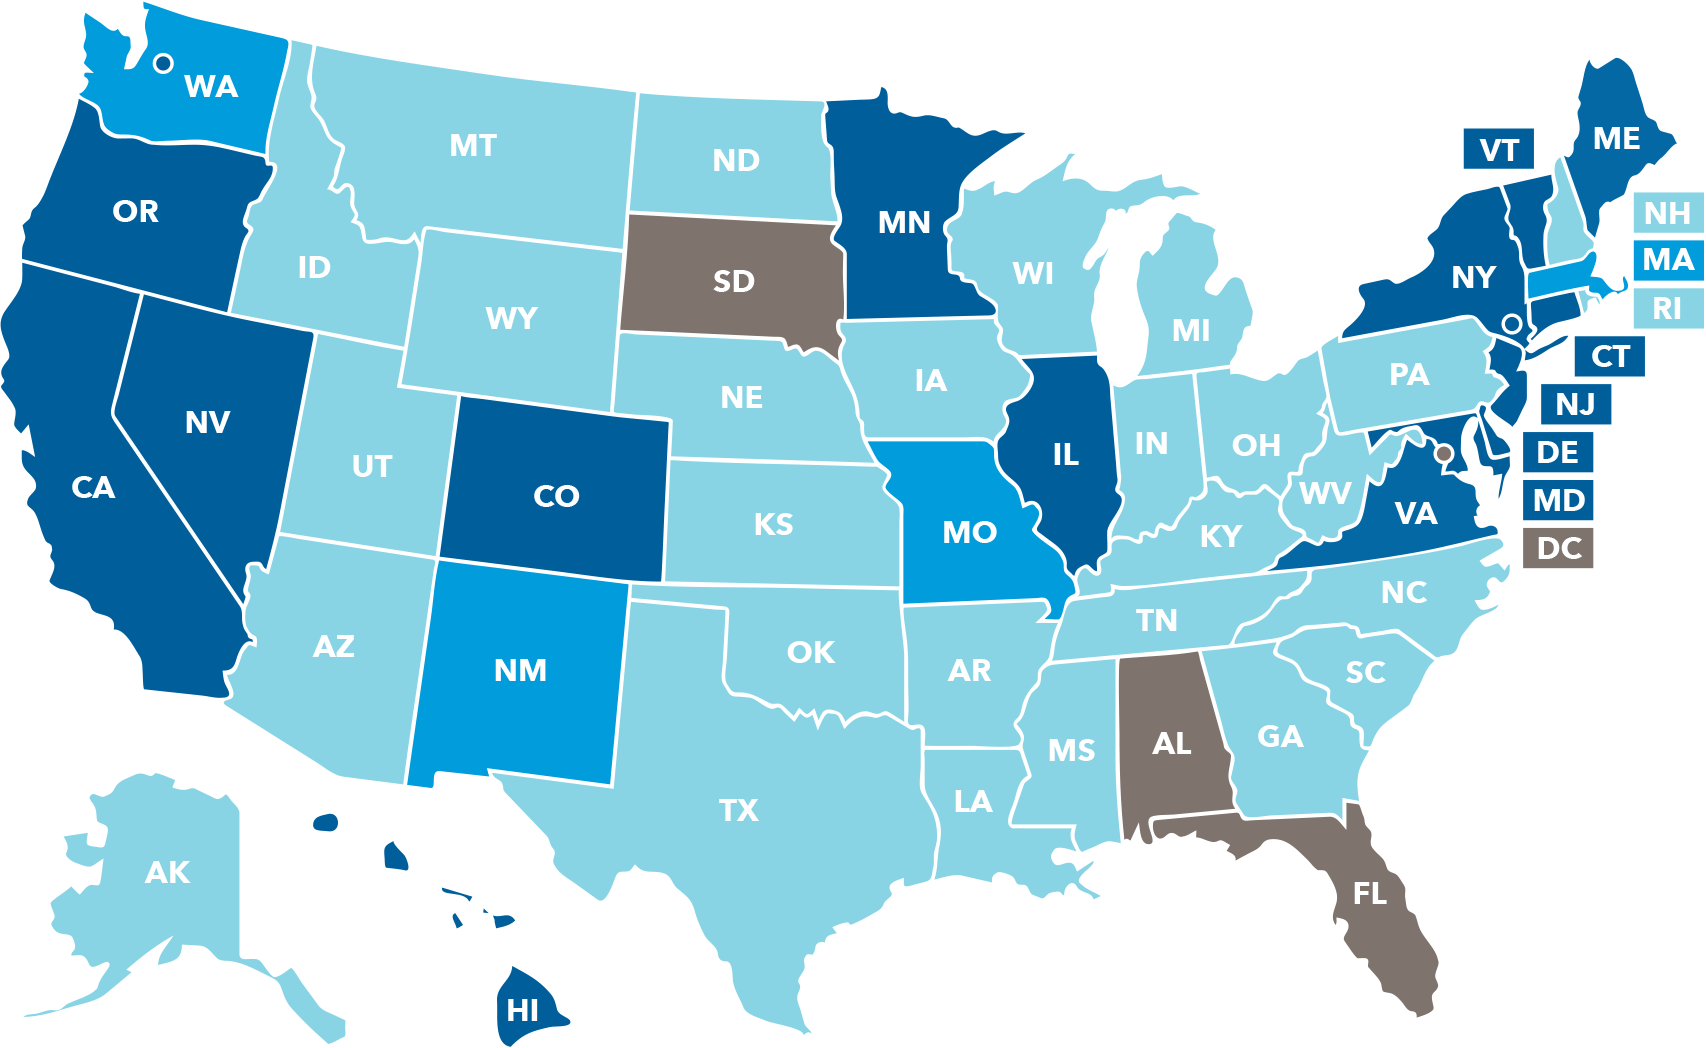 A map of the United States showing which states and cities have state-sponsored retirement plans. California, Colorado, Connecticut, Delaware, Hawaii, Illinois, Maine, Maryland, Minnesota, New Jersey, New York City, New York State, Nevada, Oregon, Seattle, Vermont and Virginia have mandatory plans. Massachusetts, Missouri, New Mexico and Washington have voluntary plans. Alabama, the District of Columbia, Florida and South Dakota have taken no action to implement a plan. The remaining states have legislative proposals in progress.